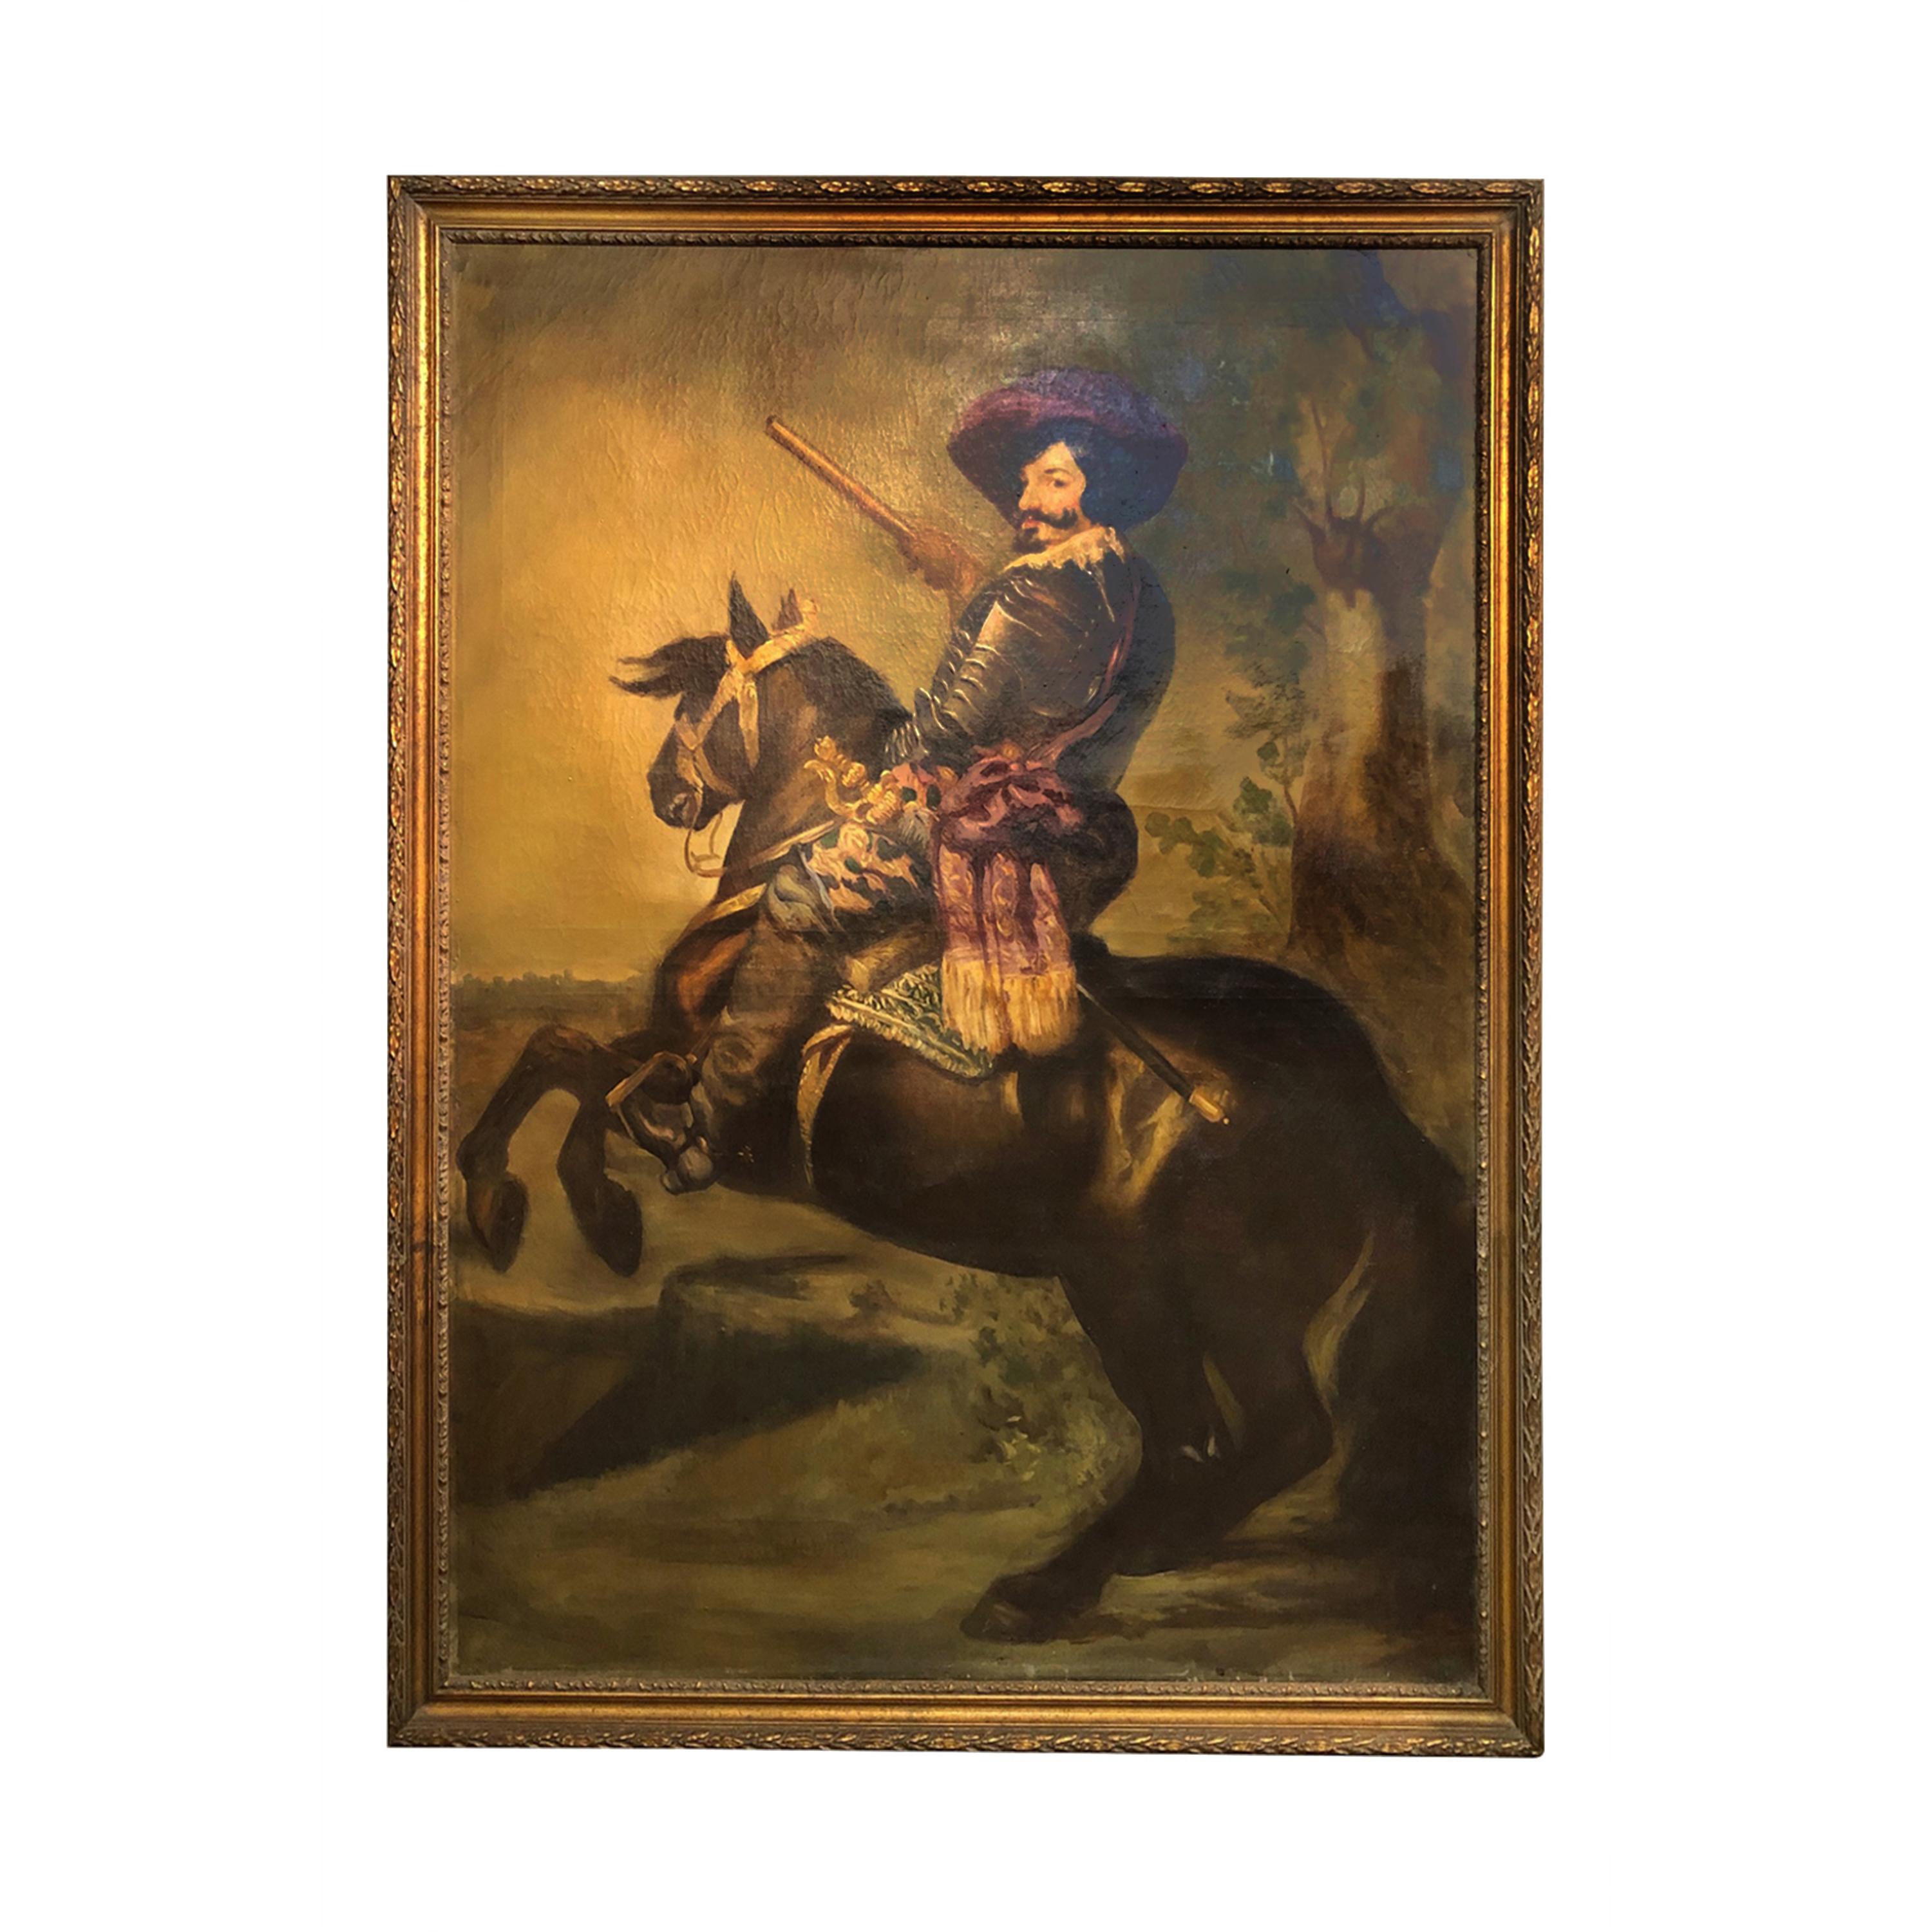 A LARGE OIL ON CANVAS OF 'DON GASPAR DE GUZMAN COUNT-DUKE OF OLIVARES, MID-20TH CENTURY, originally painted by Diego Valazquez ( 1599-1660), Provenance: Painting has been used in the Three Musketeers film and was purchased from universal studios in